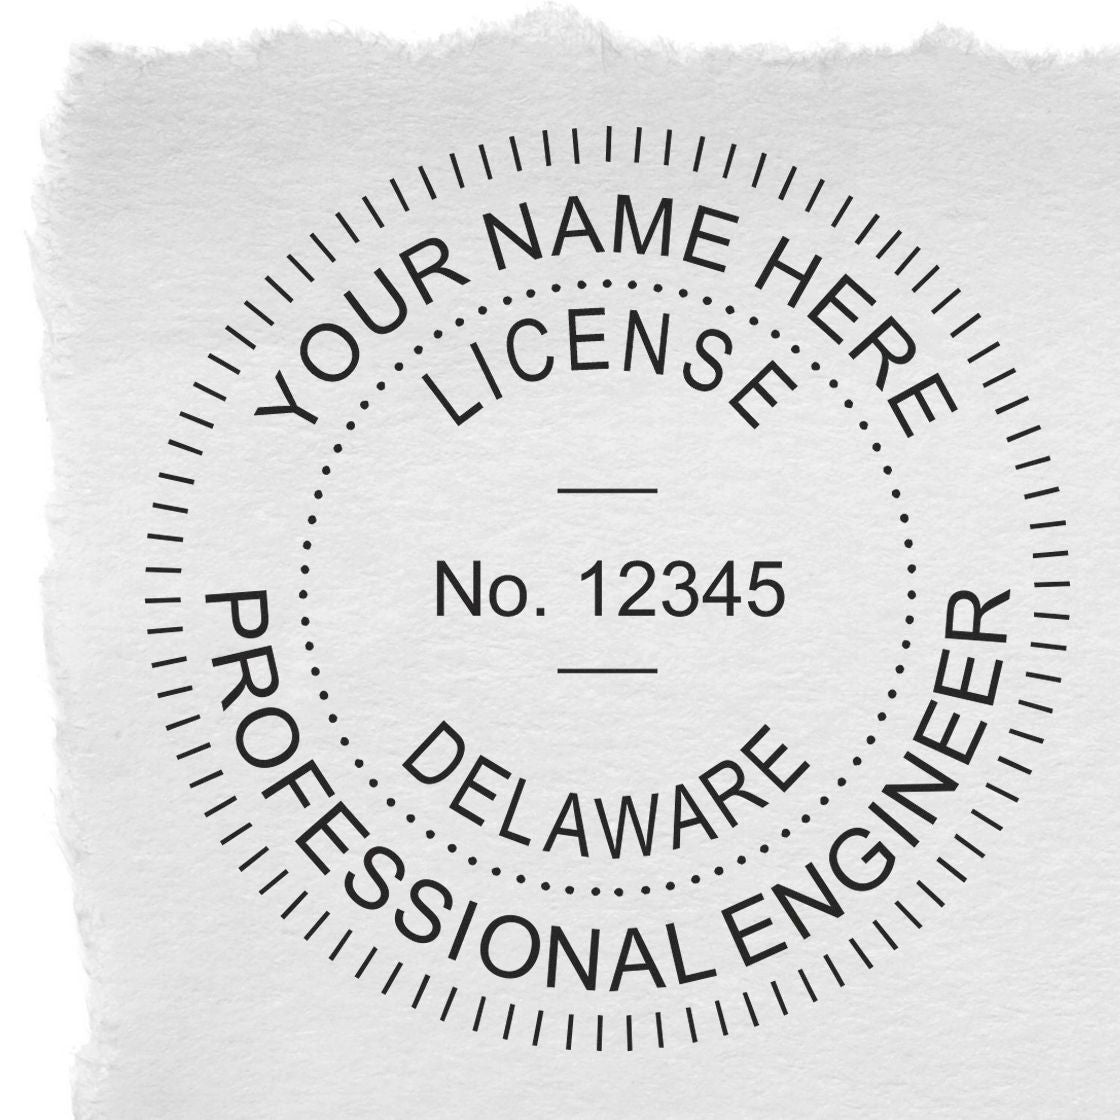 A lifestyle photo showing a stamped image of the Delaware Professional Engineer Seal Stamp on a piece of paper